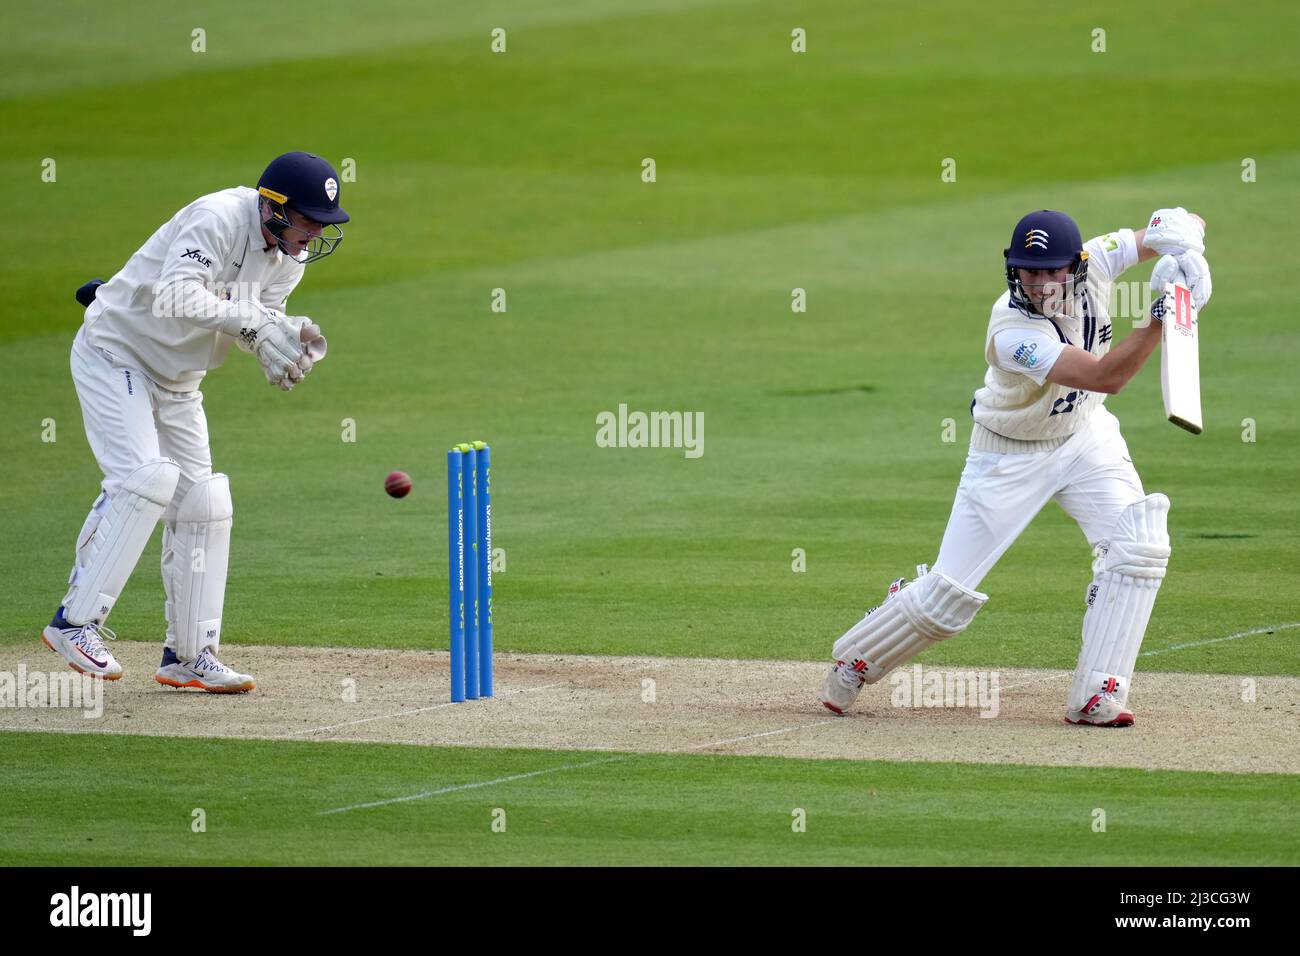 Middlesex's Josh De Caires batting during day one of the LV= County Championship Division Two match at Lord's Cricket Ground, London. Stock Photo